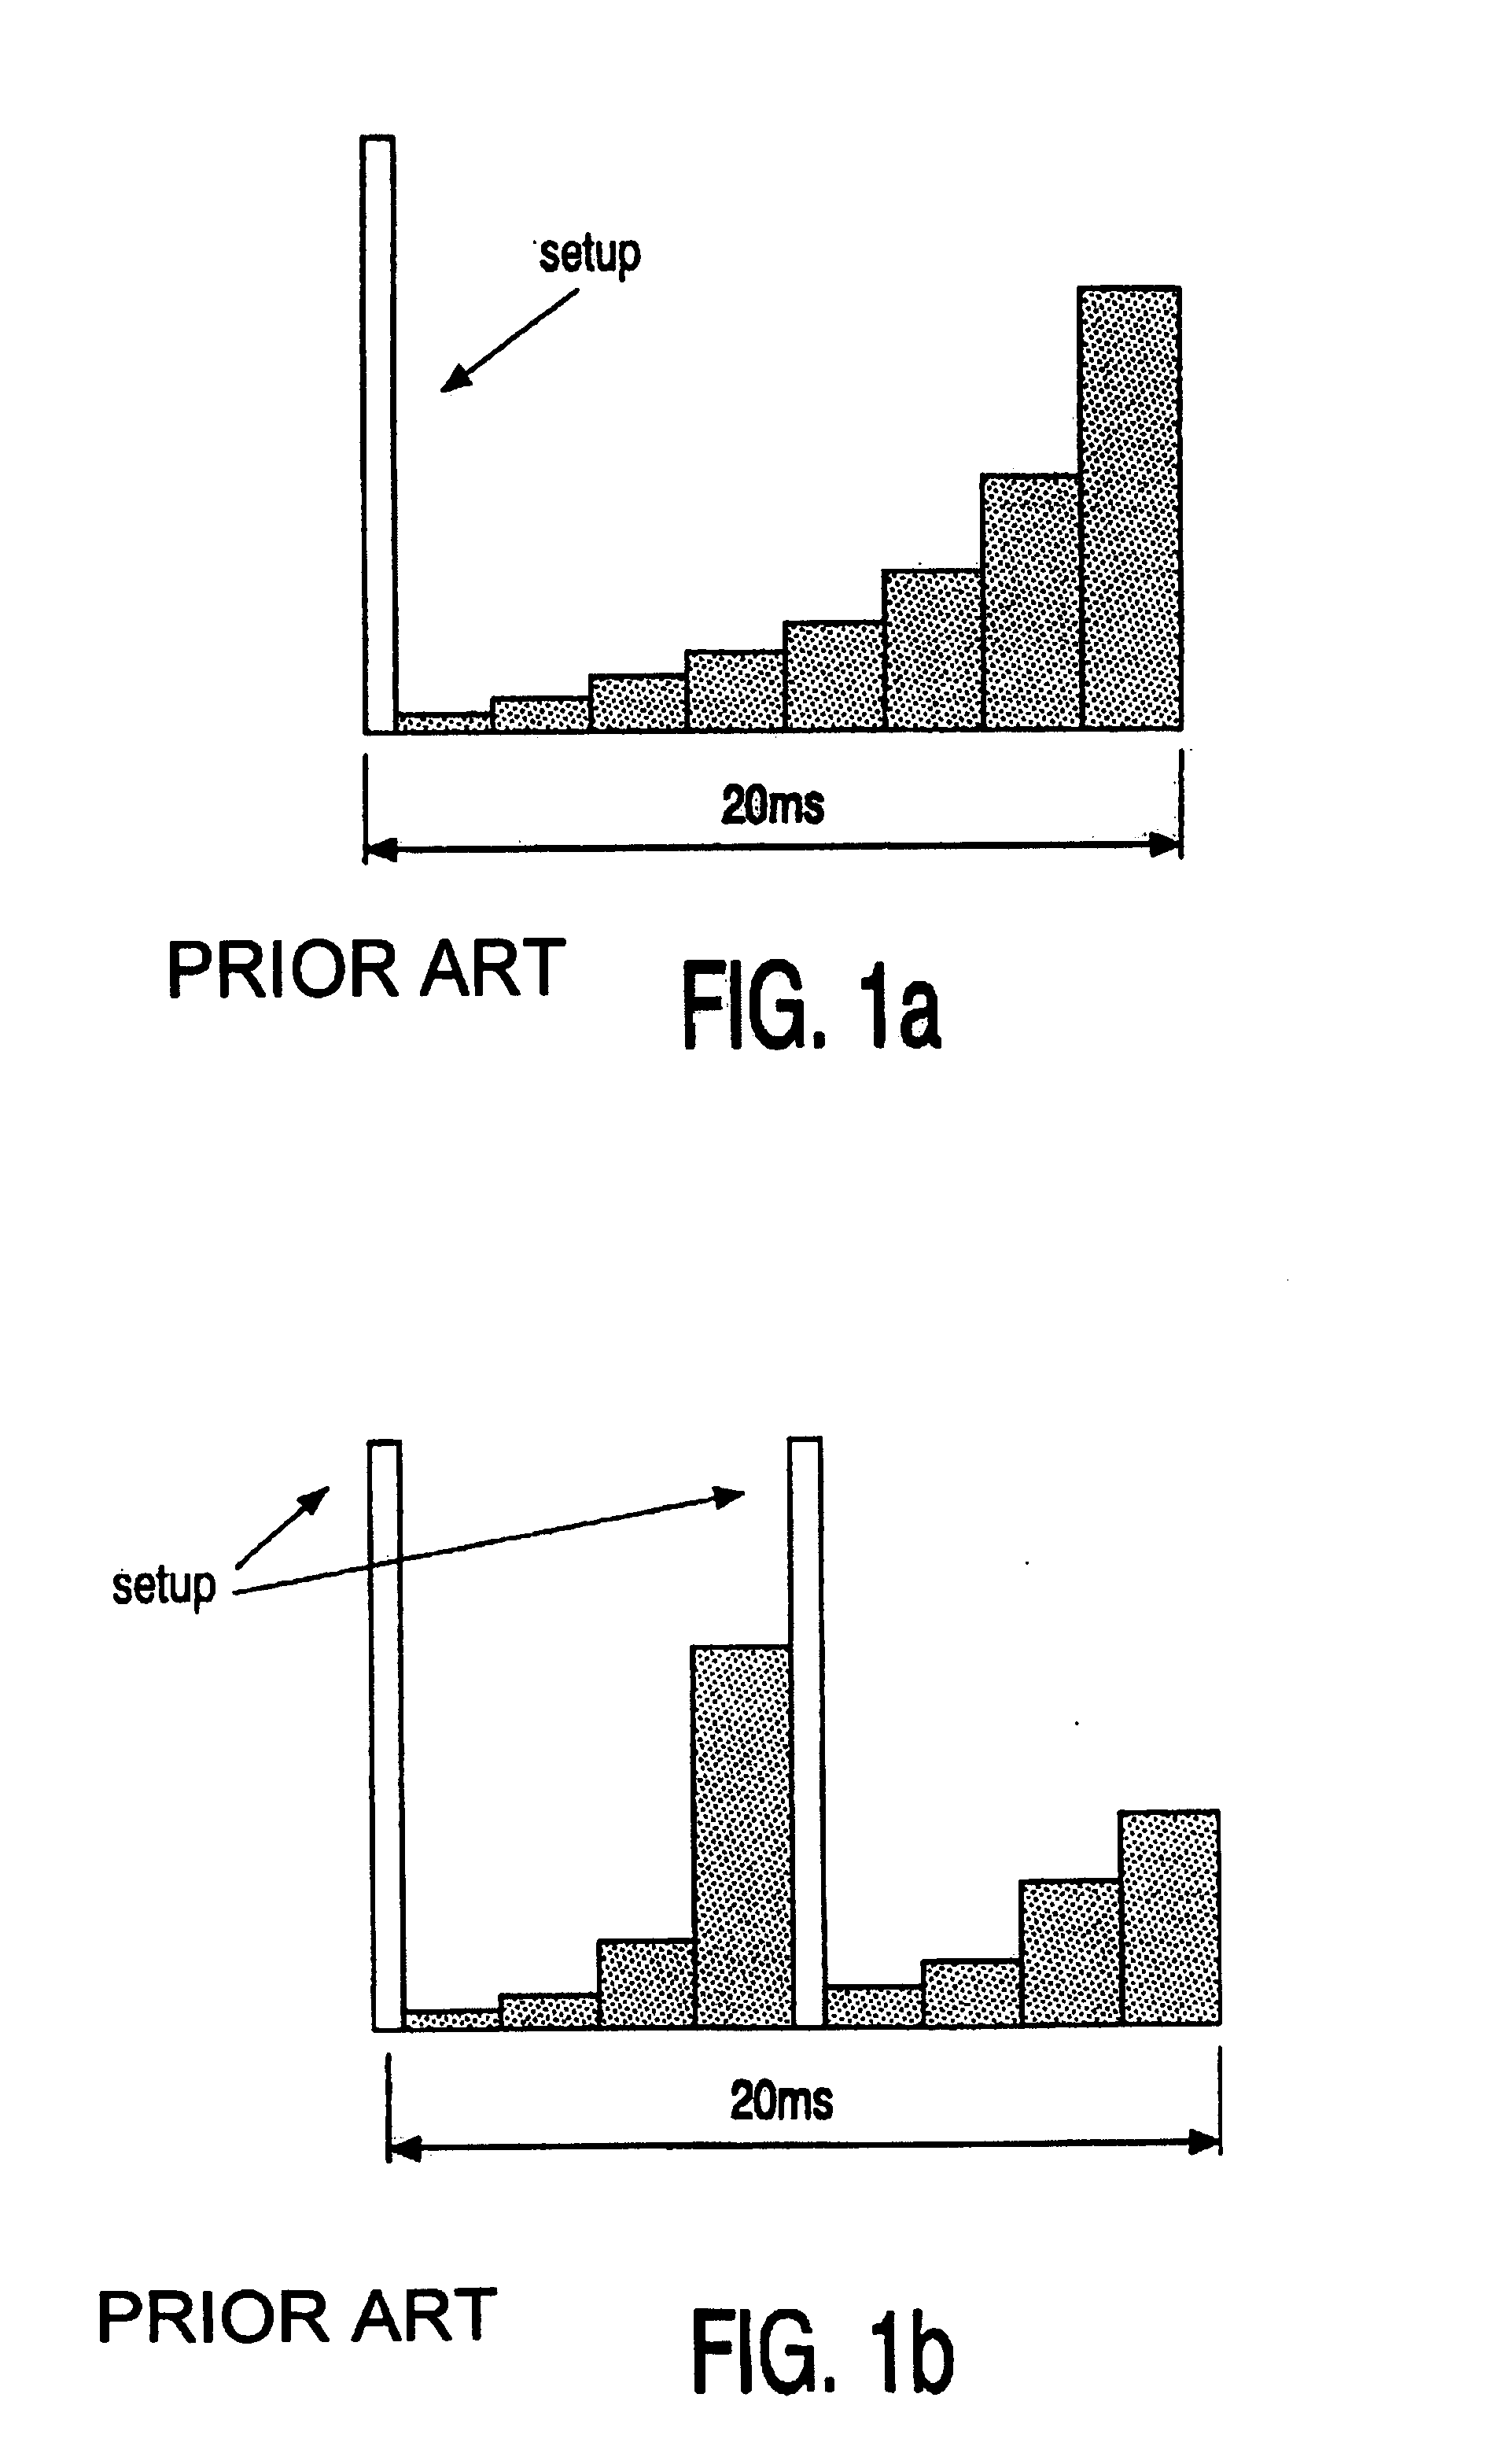 Motion compensated upconversion for plasma displays